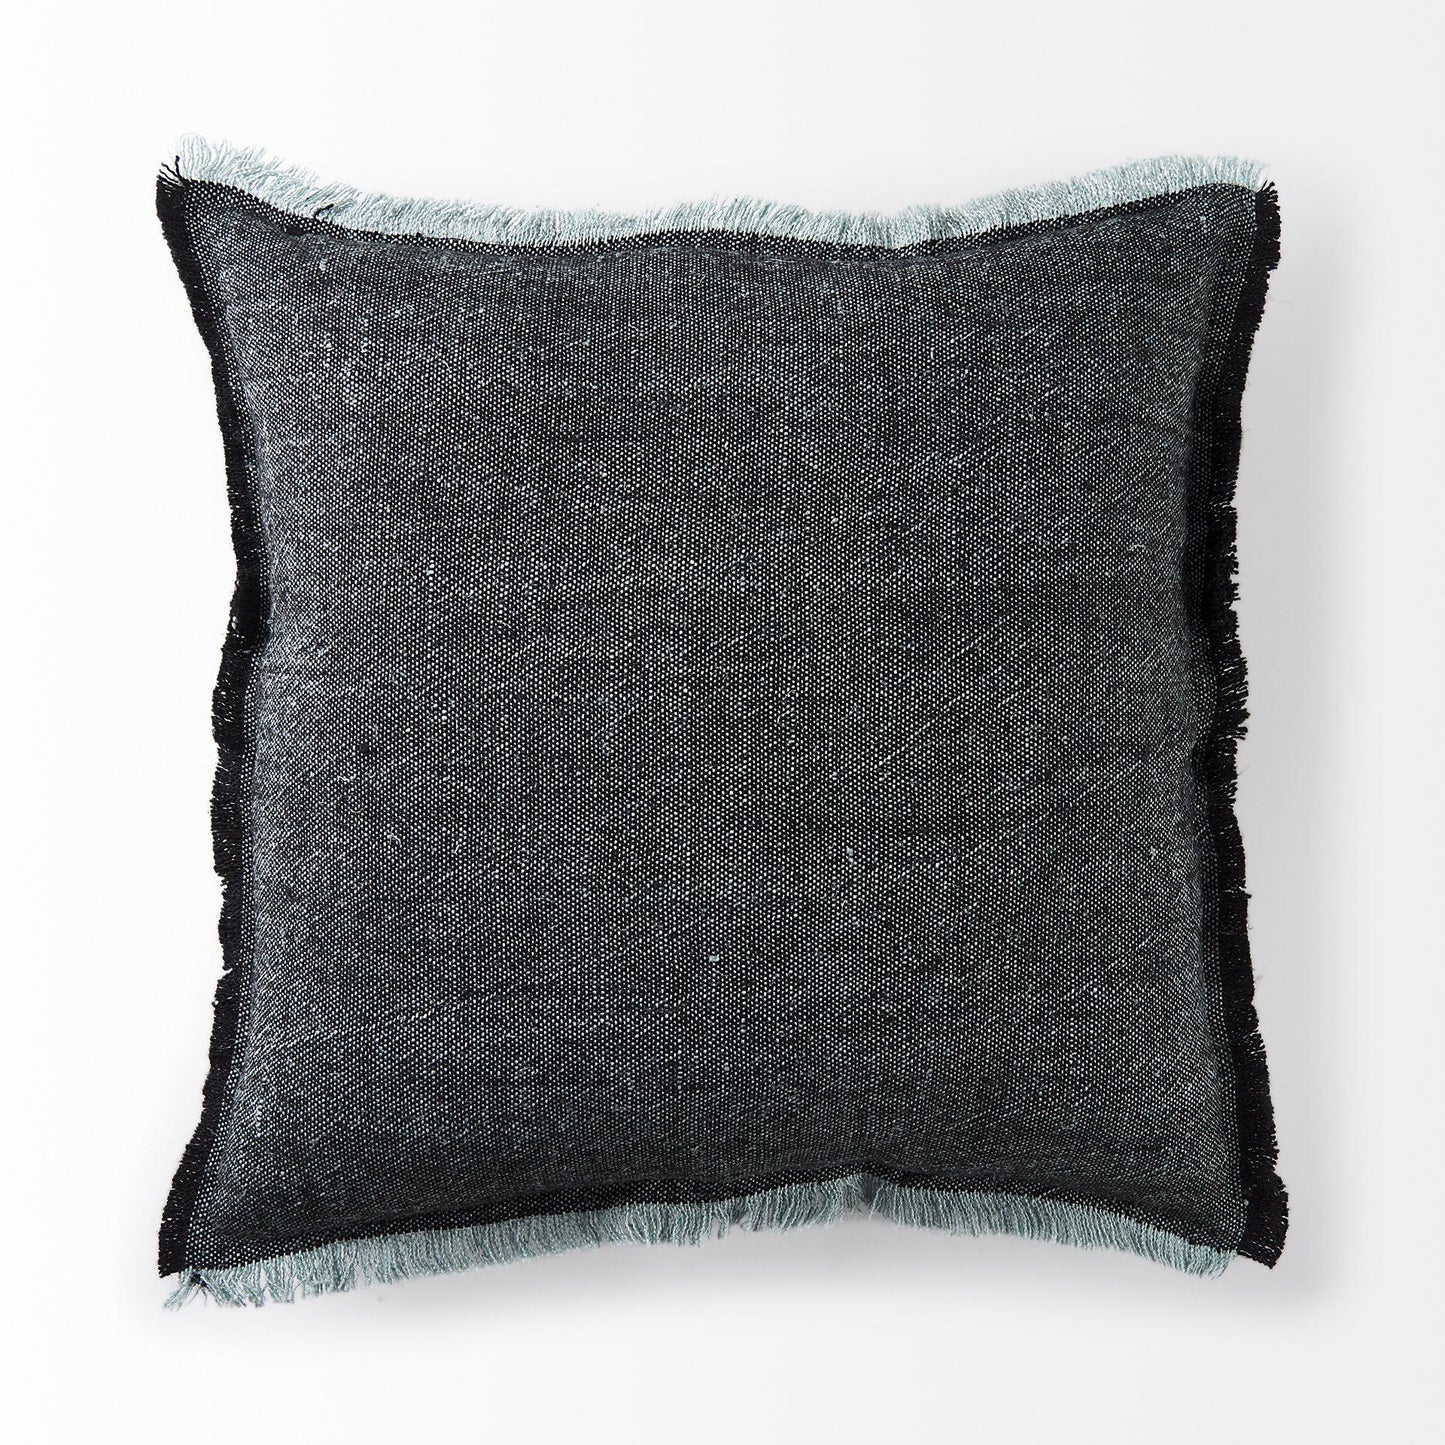 Malia 20L x 20W Black and Teal Fabric Fringed Pillow Cover